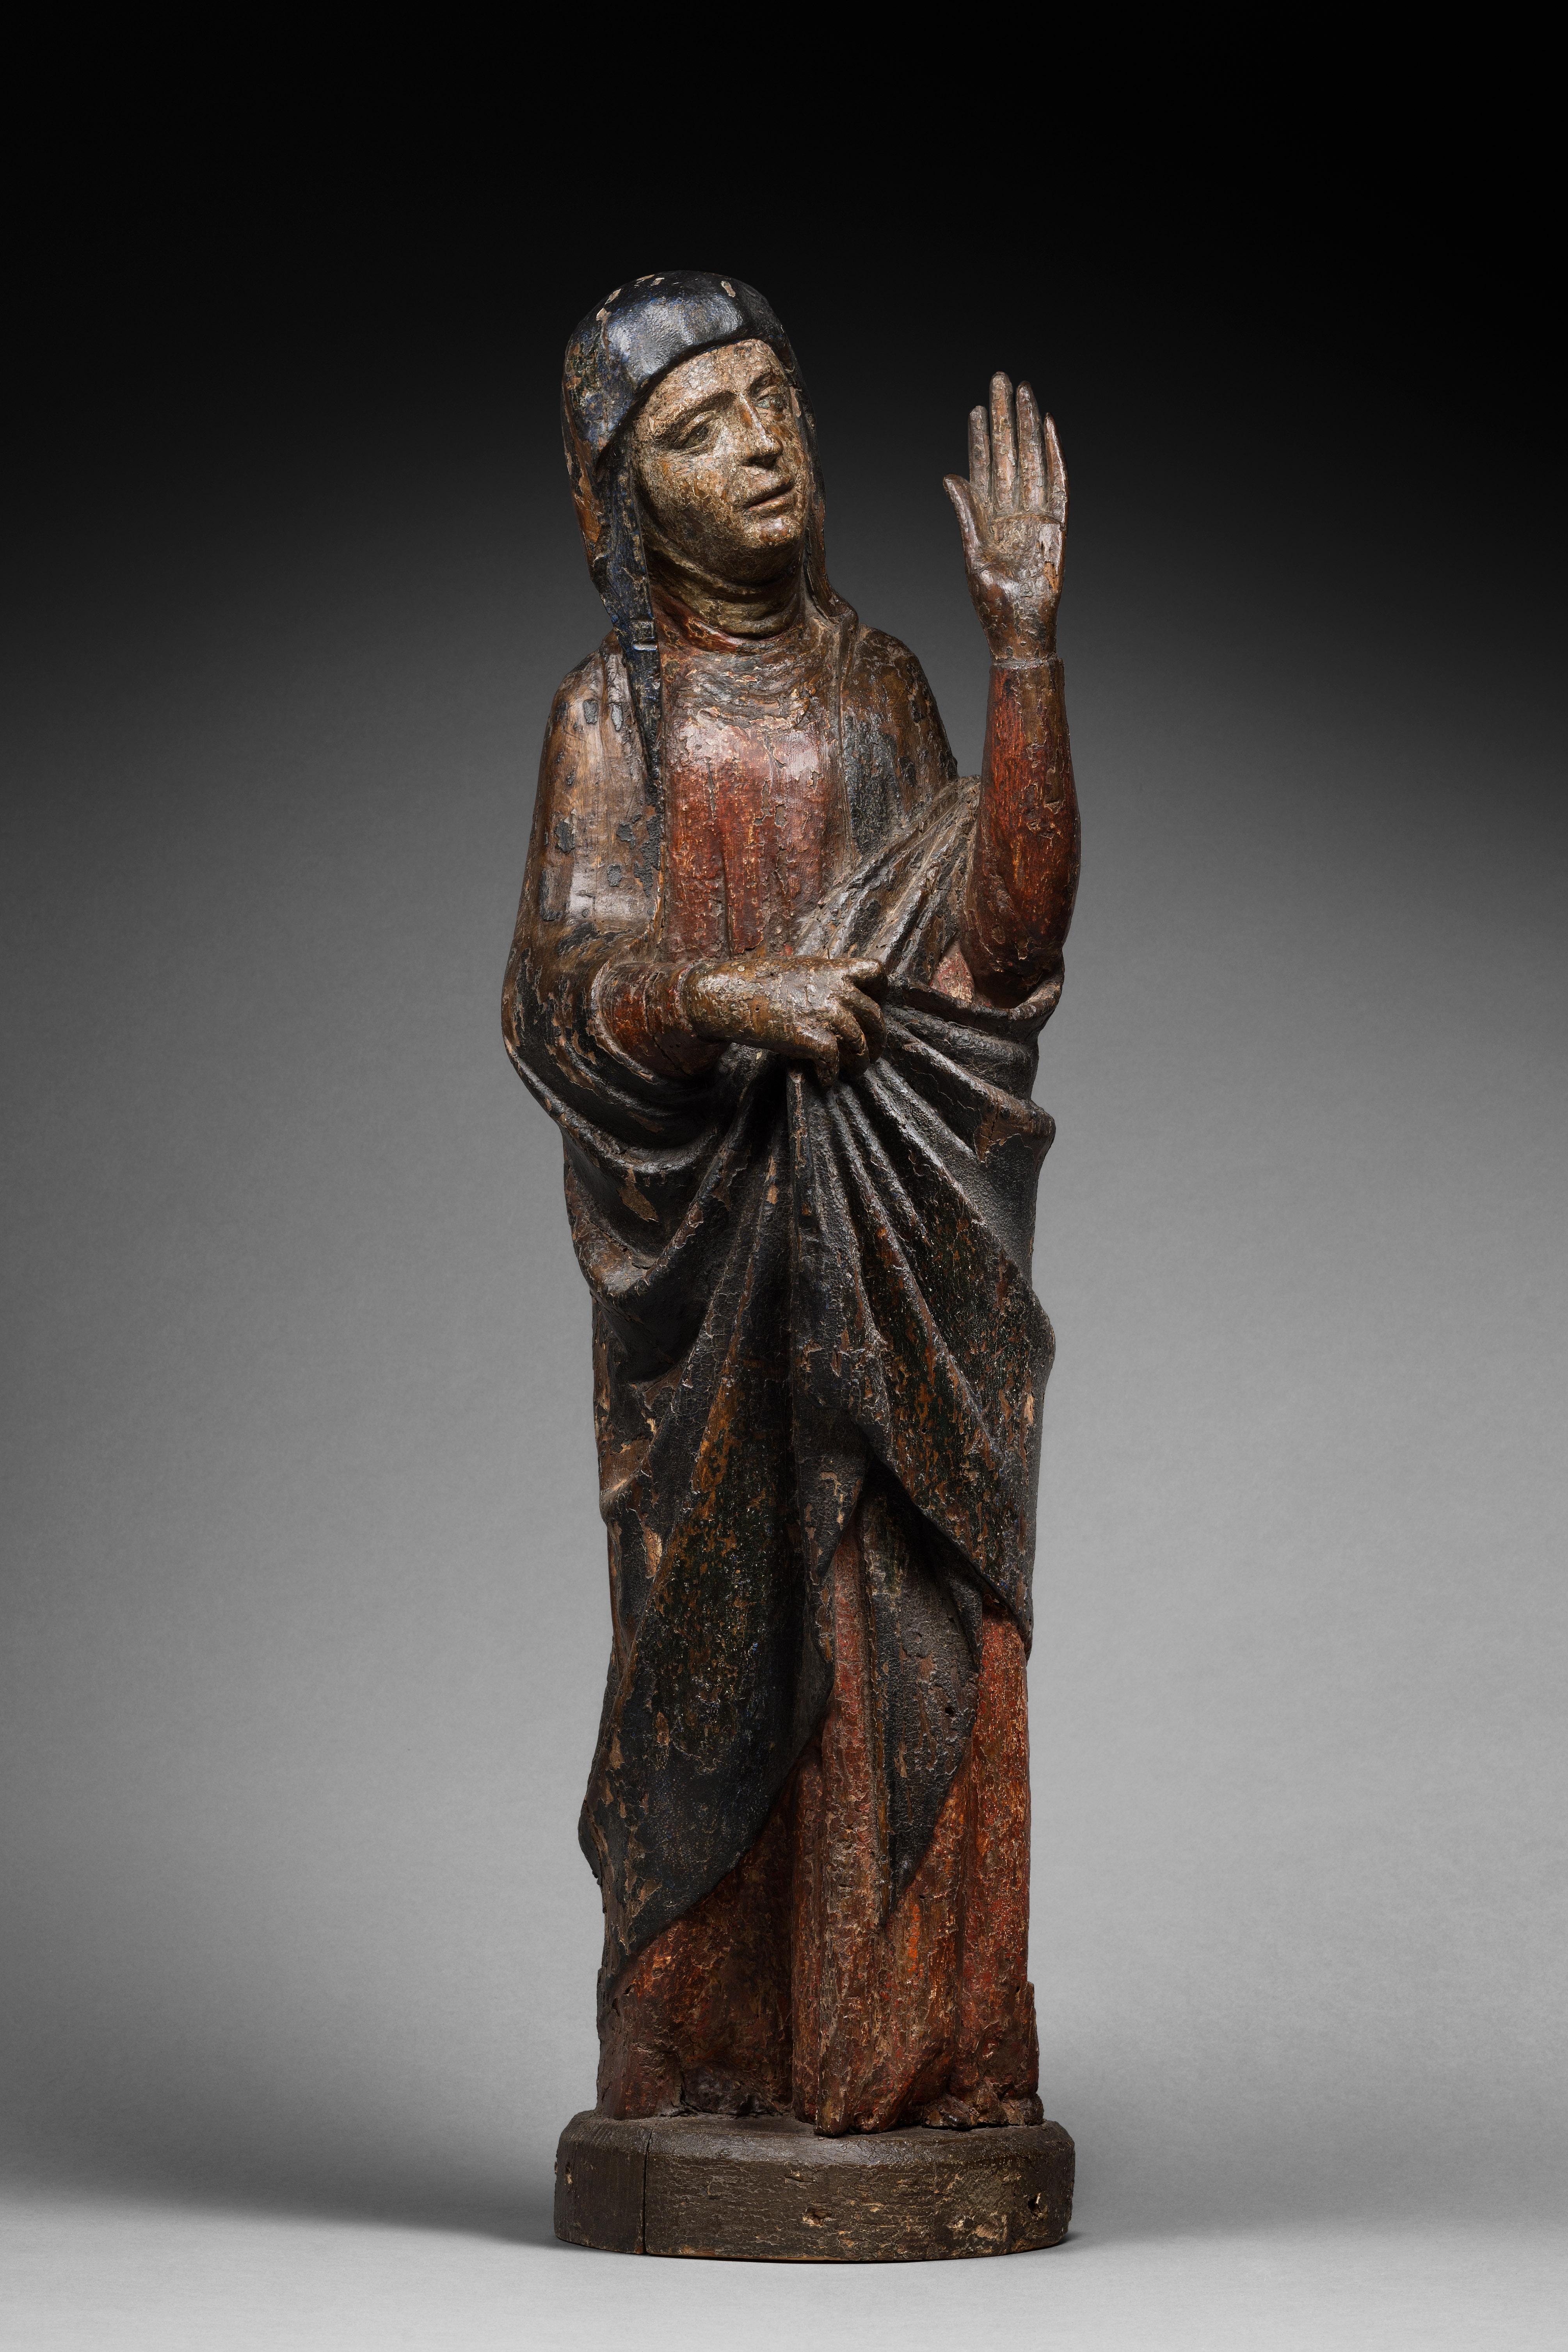 VIRGIN OF CALVARY

ORIGIN : ITALY
PERIOD : SECOND HALF 13th CENTURY

Height : 75 cm
Length : 19 cm
Depth : 13 cm

Polychrome wood carved in the round


This rare sculpture of a Virgin of Calvary originally belonged to an ensemble